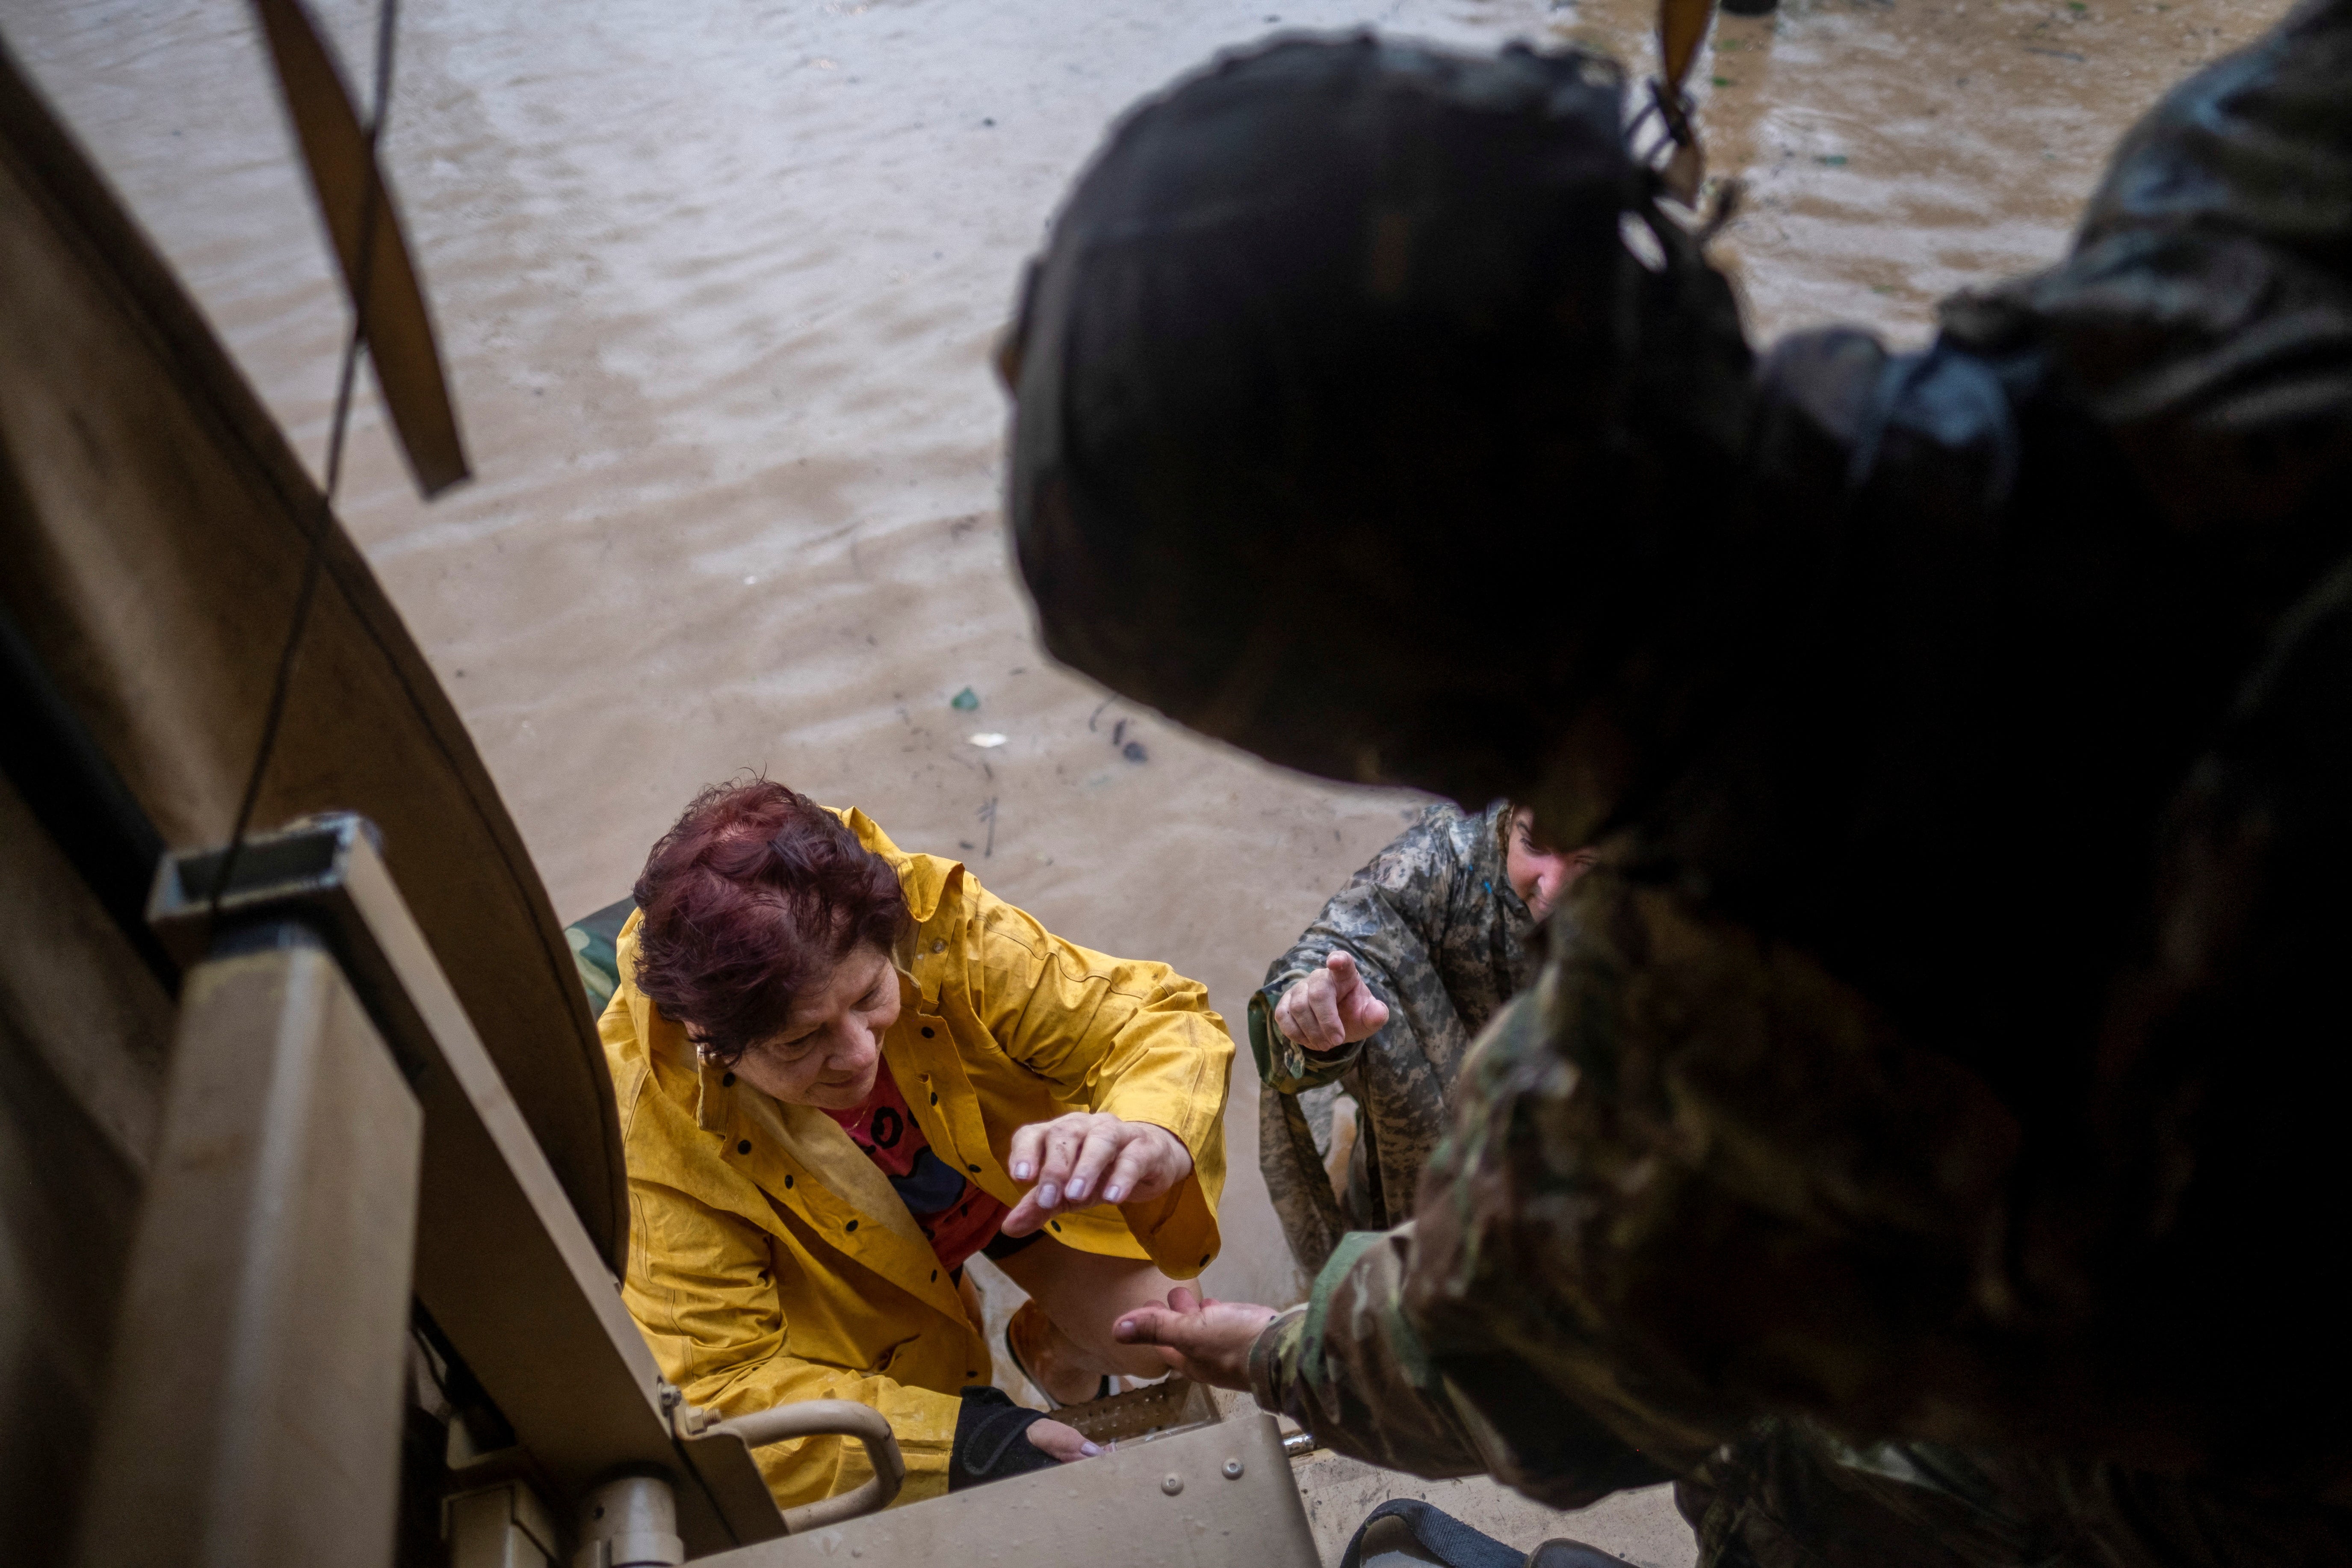 The National Guard rescues a woman in Salinas, Puerto Rico after Hurricane Fiona